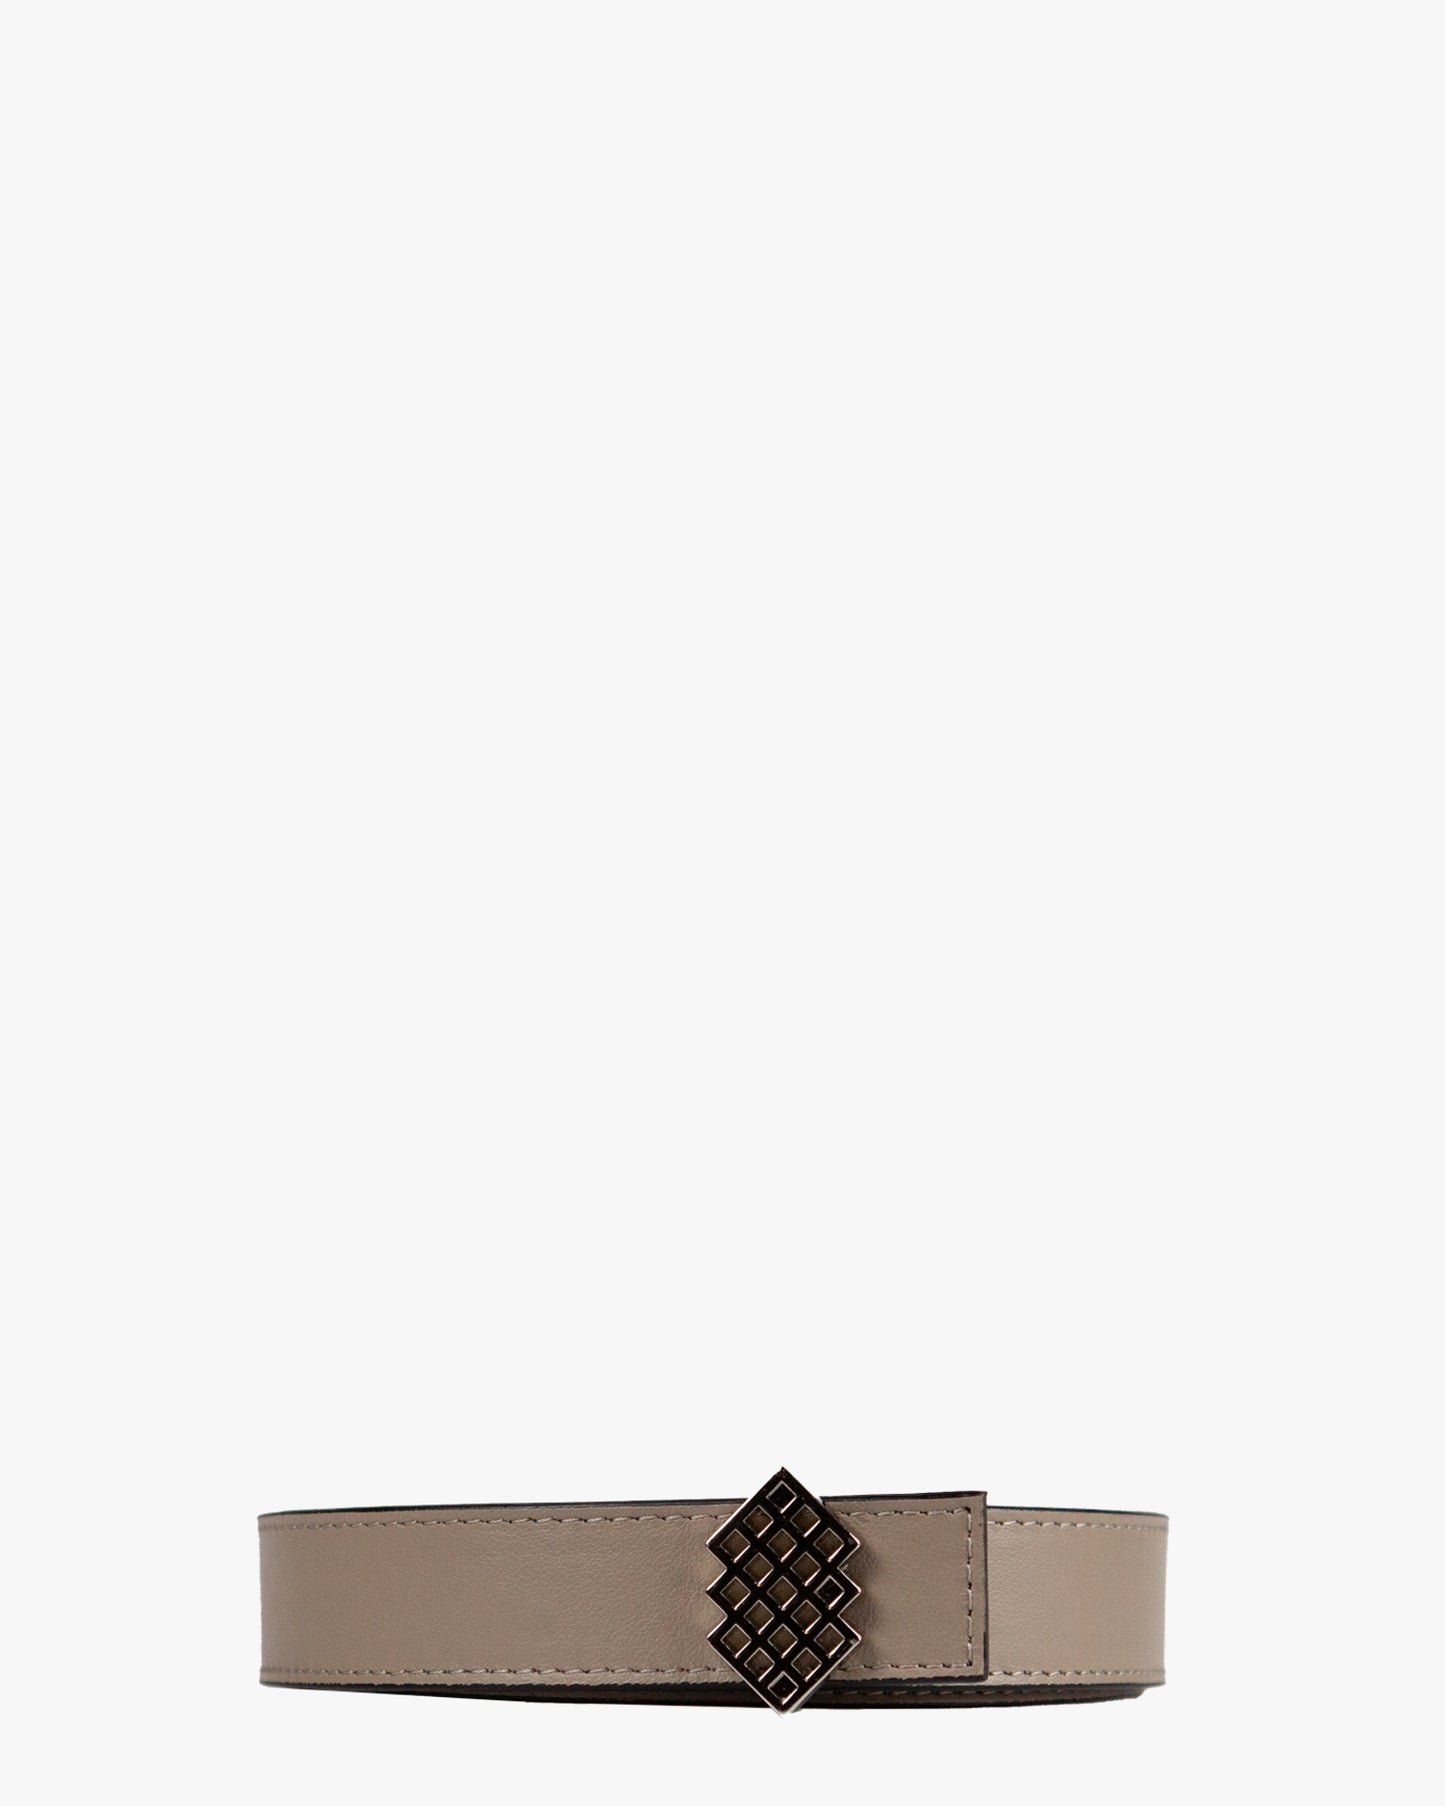 REVERSIBLE LEATHER BELT IN TAUPE